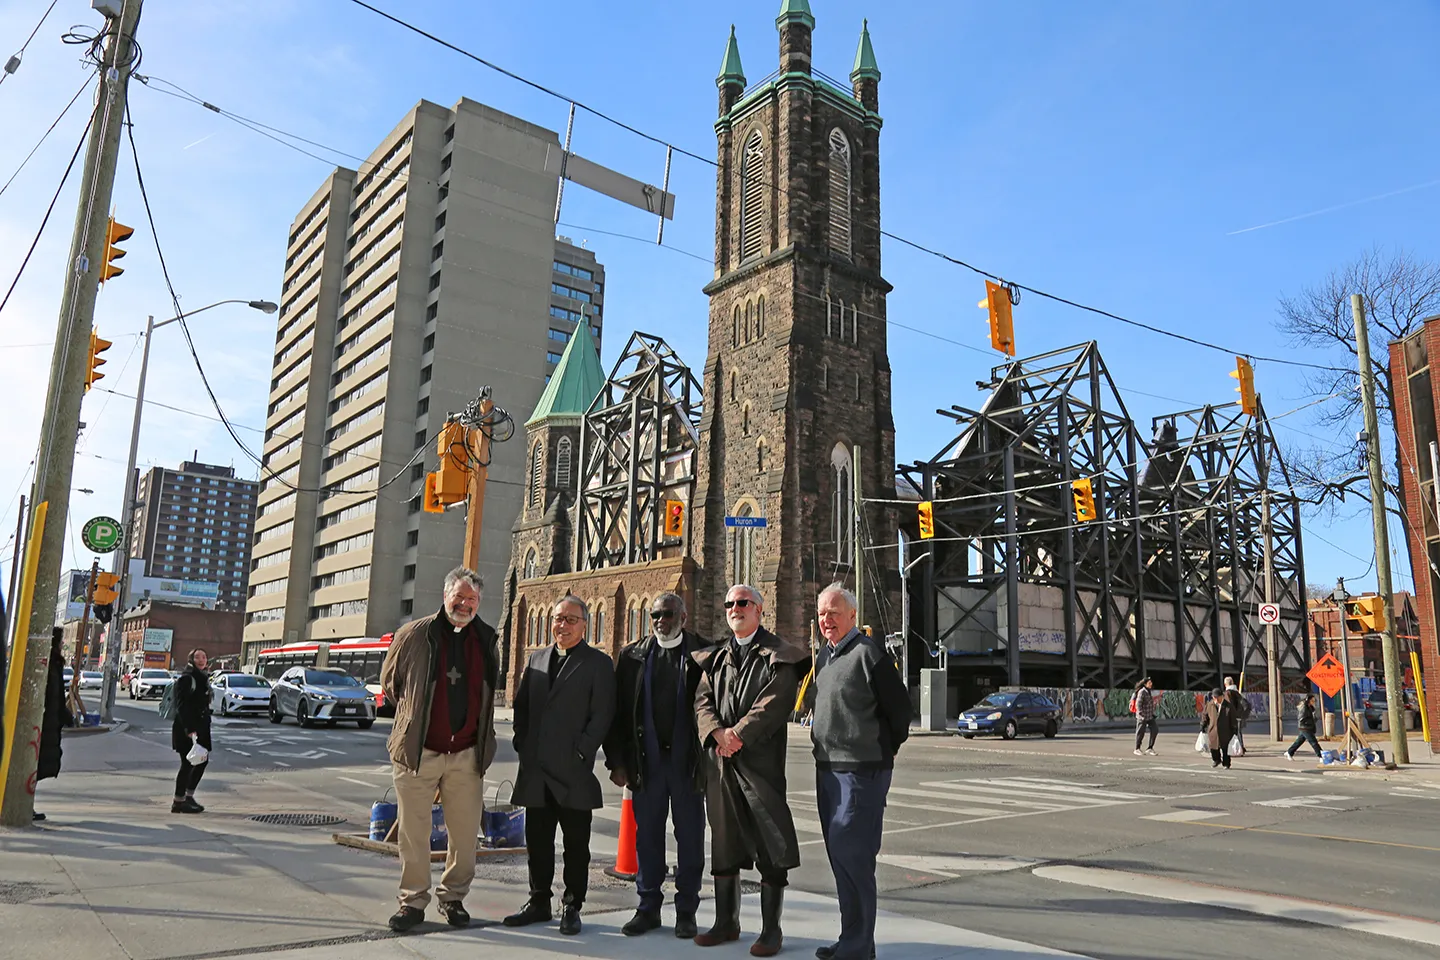 Representatives from the three partner churches stand in front of the construction site at Bloor Street United Church in Toronto. The national offices for the Anglican, Presbyterian, and United churches will be moving to the newly-built offfice space in 2026. From left to right: Rev. Douglas Ducharme, minister of Bloor Street United, Rev. Victor Kim, principal clerk of the PCC, Rev. Michael Blair, general secretary of the UCC, Rev. Alan Perry, general secretary of the ACC, and Bob Hilliard, trustee of Bloor Street United